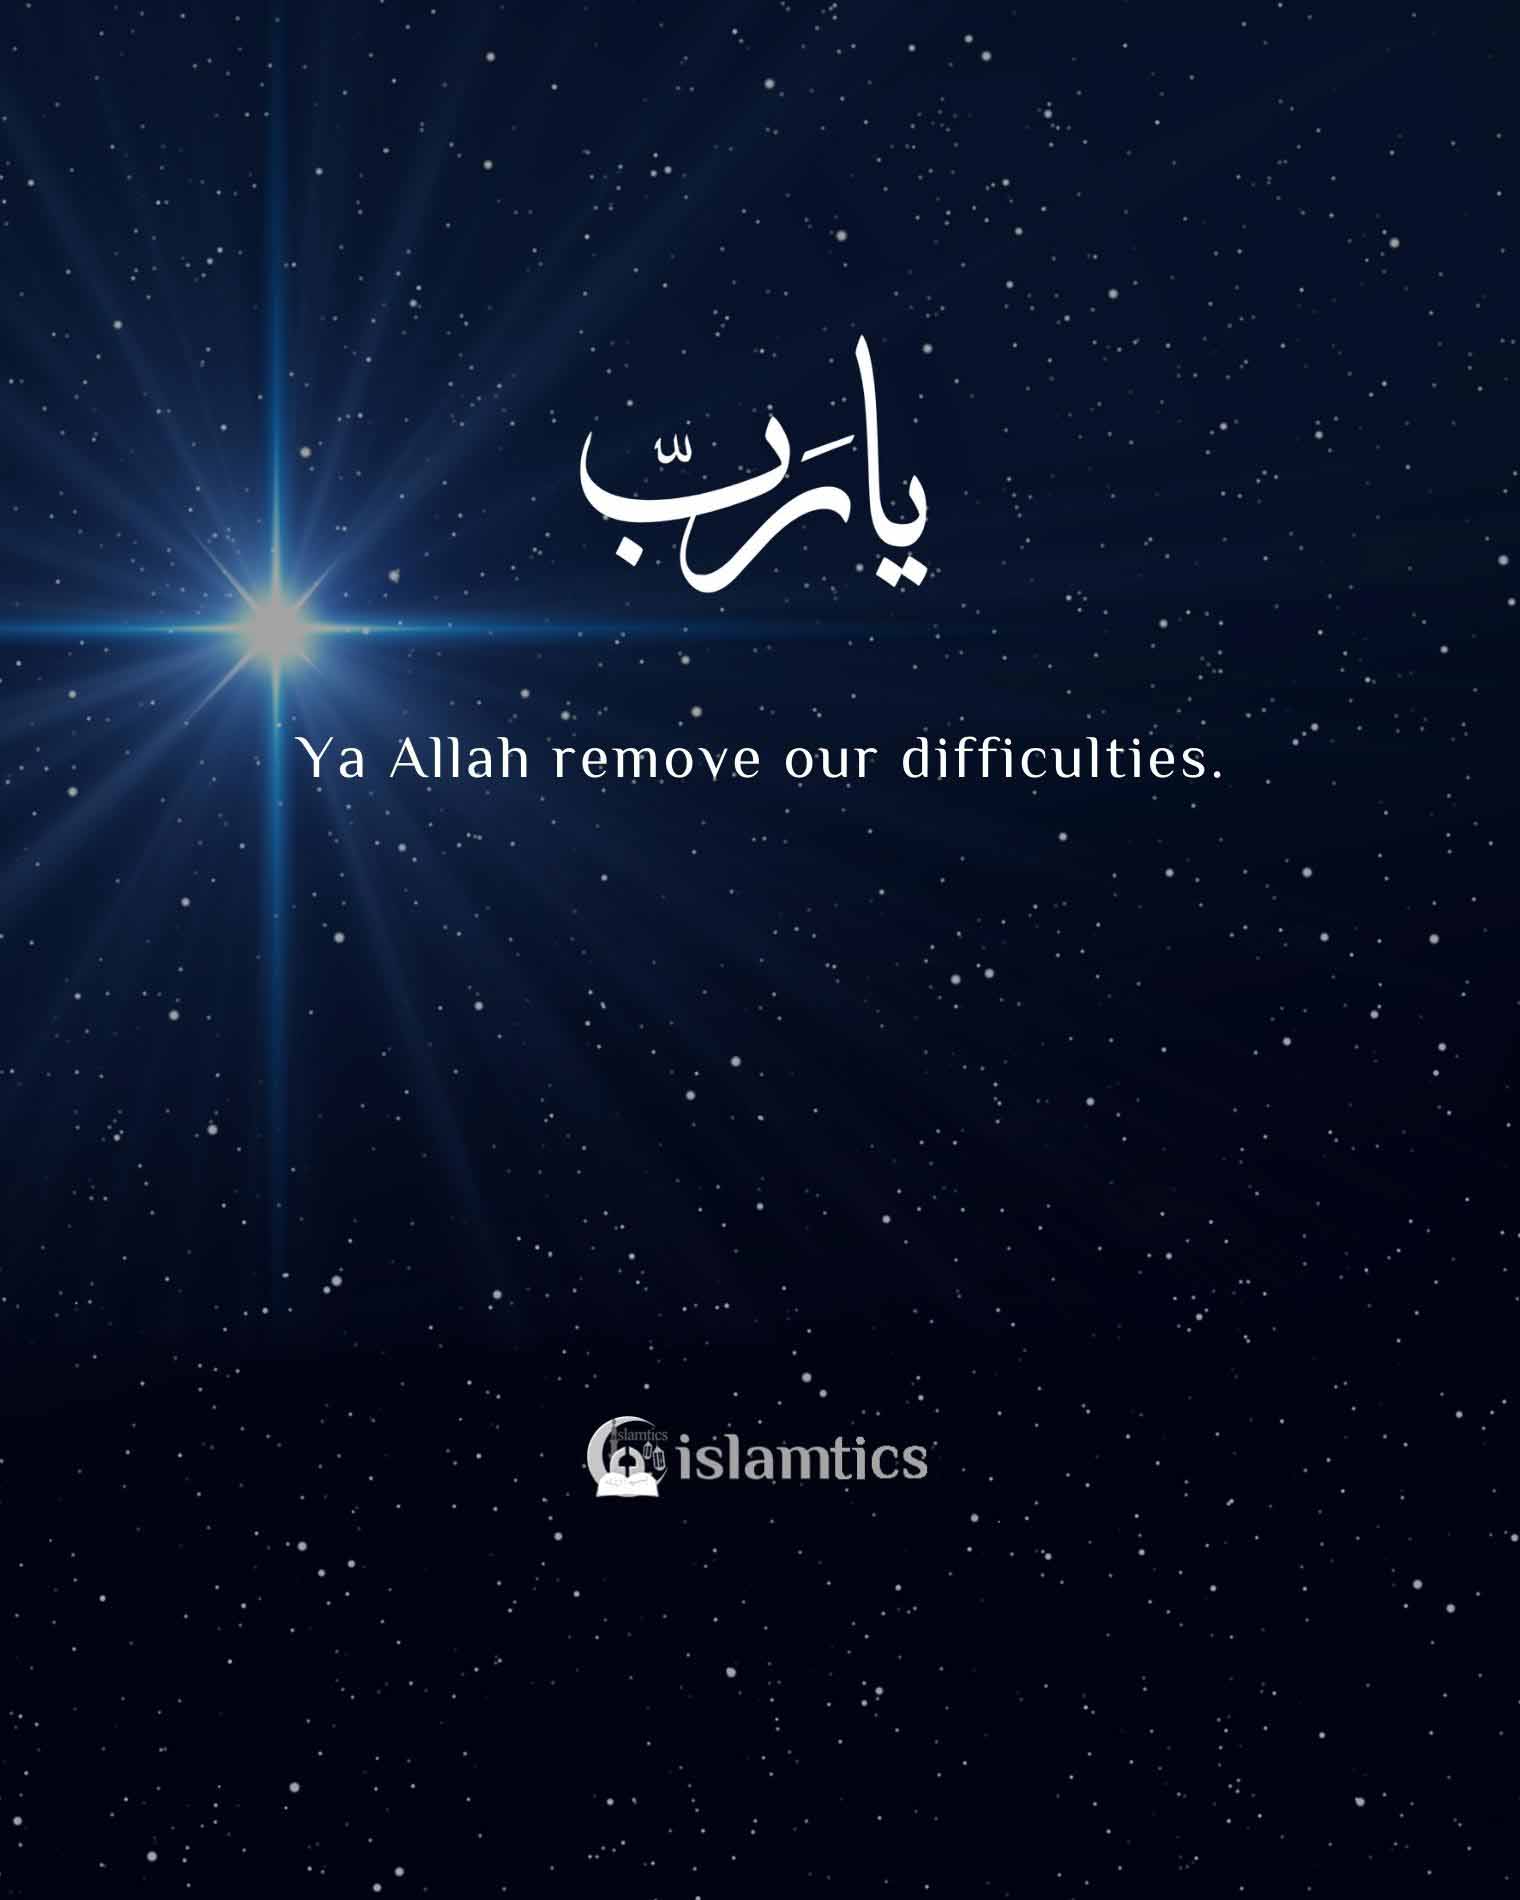 Ya Allah remove our difficulties.